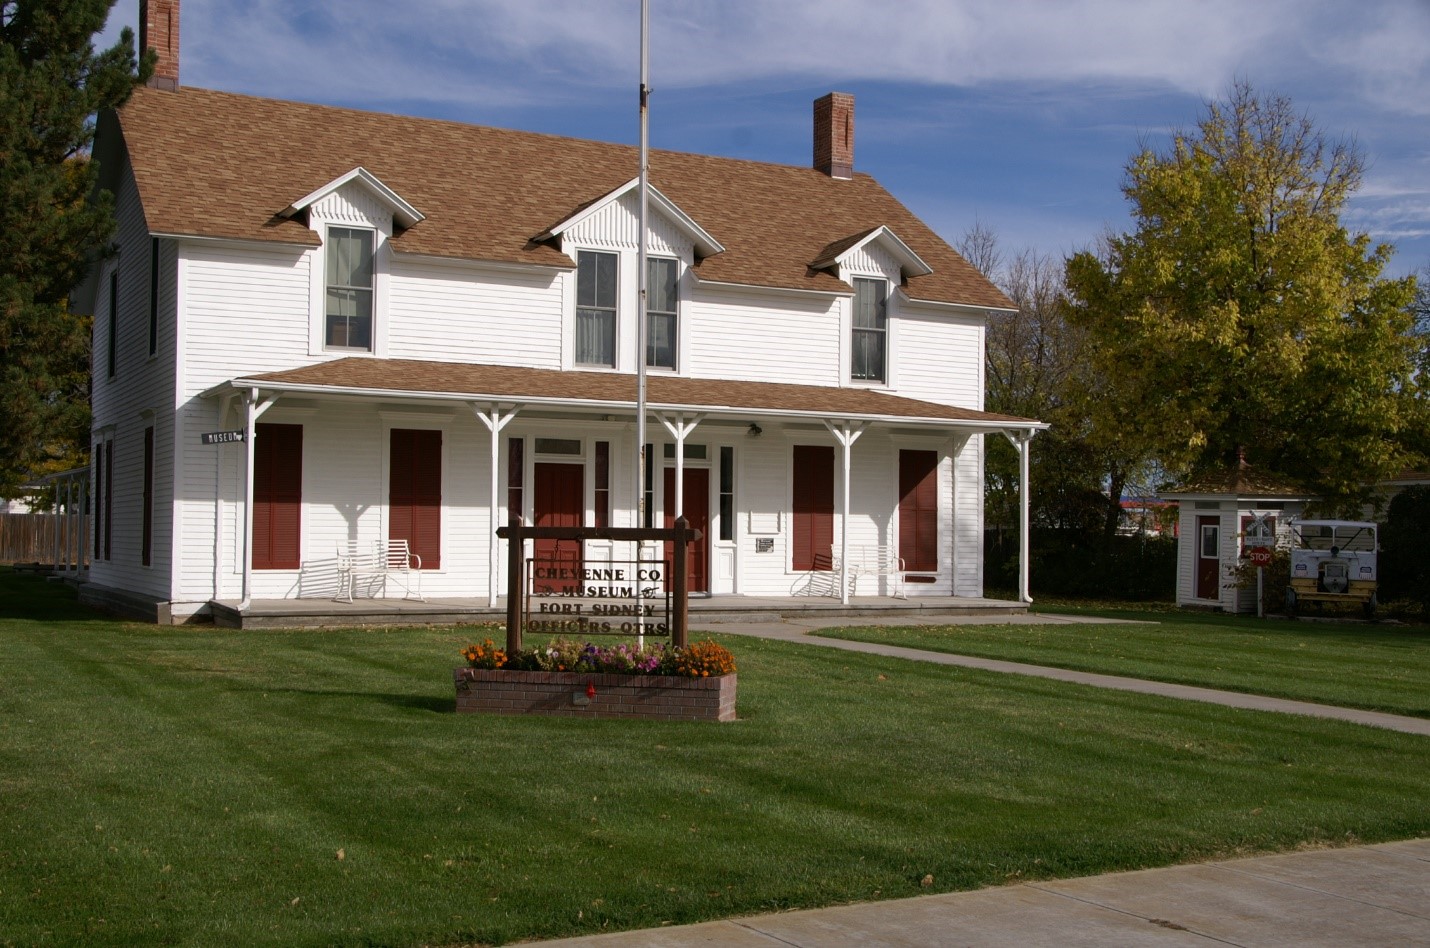 Bachelor Officers Quarters, Fort Sidney, listed on the National Register of Historic Places in 1973 as part of the Ft. Sidney Historic District